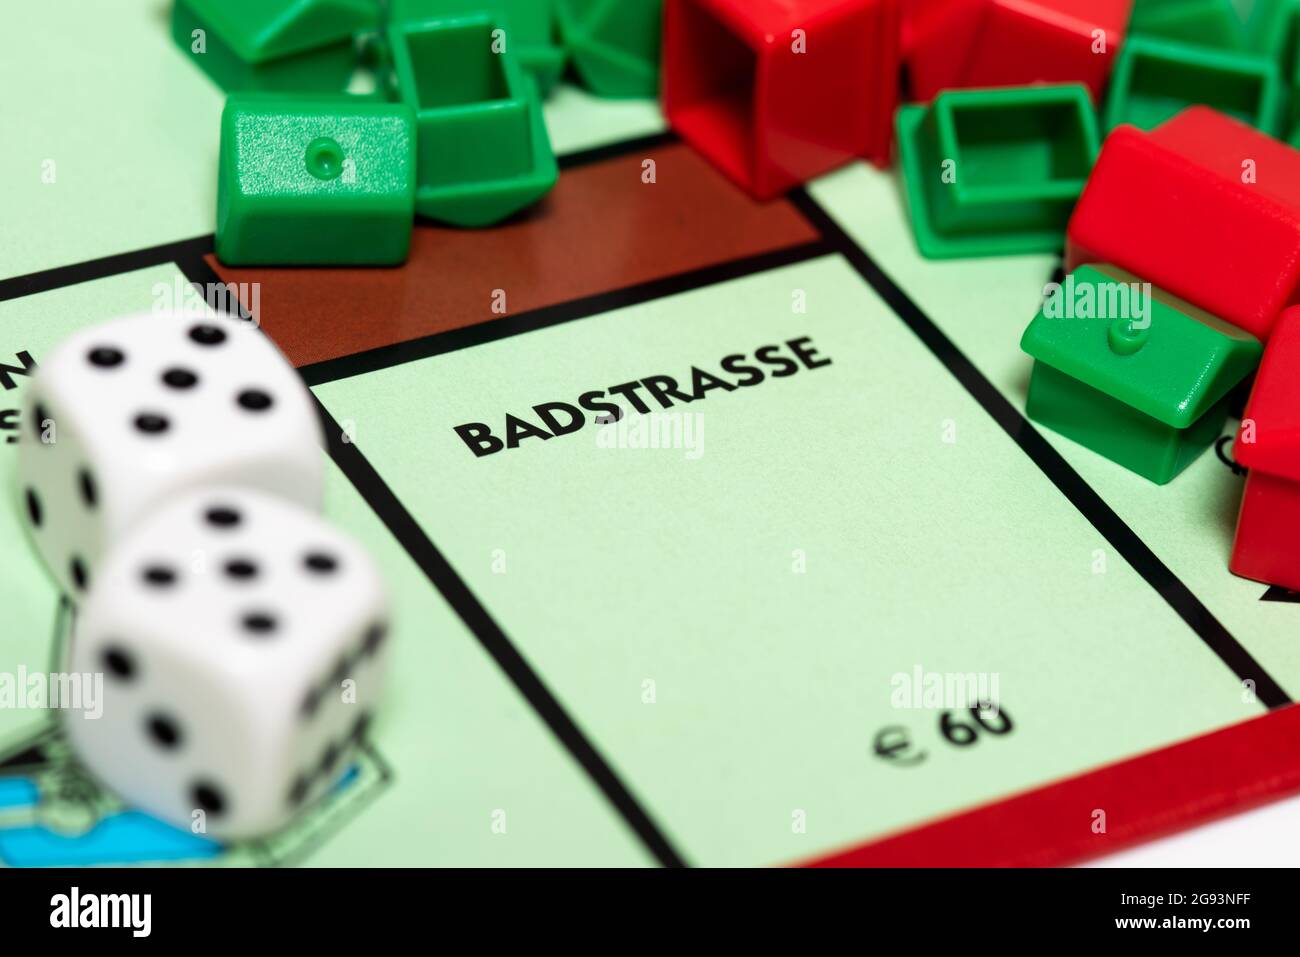 Close up of Badstrasse on German Monopoly Board. Stock Photo